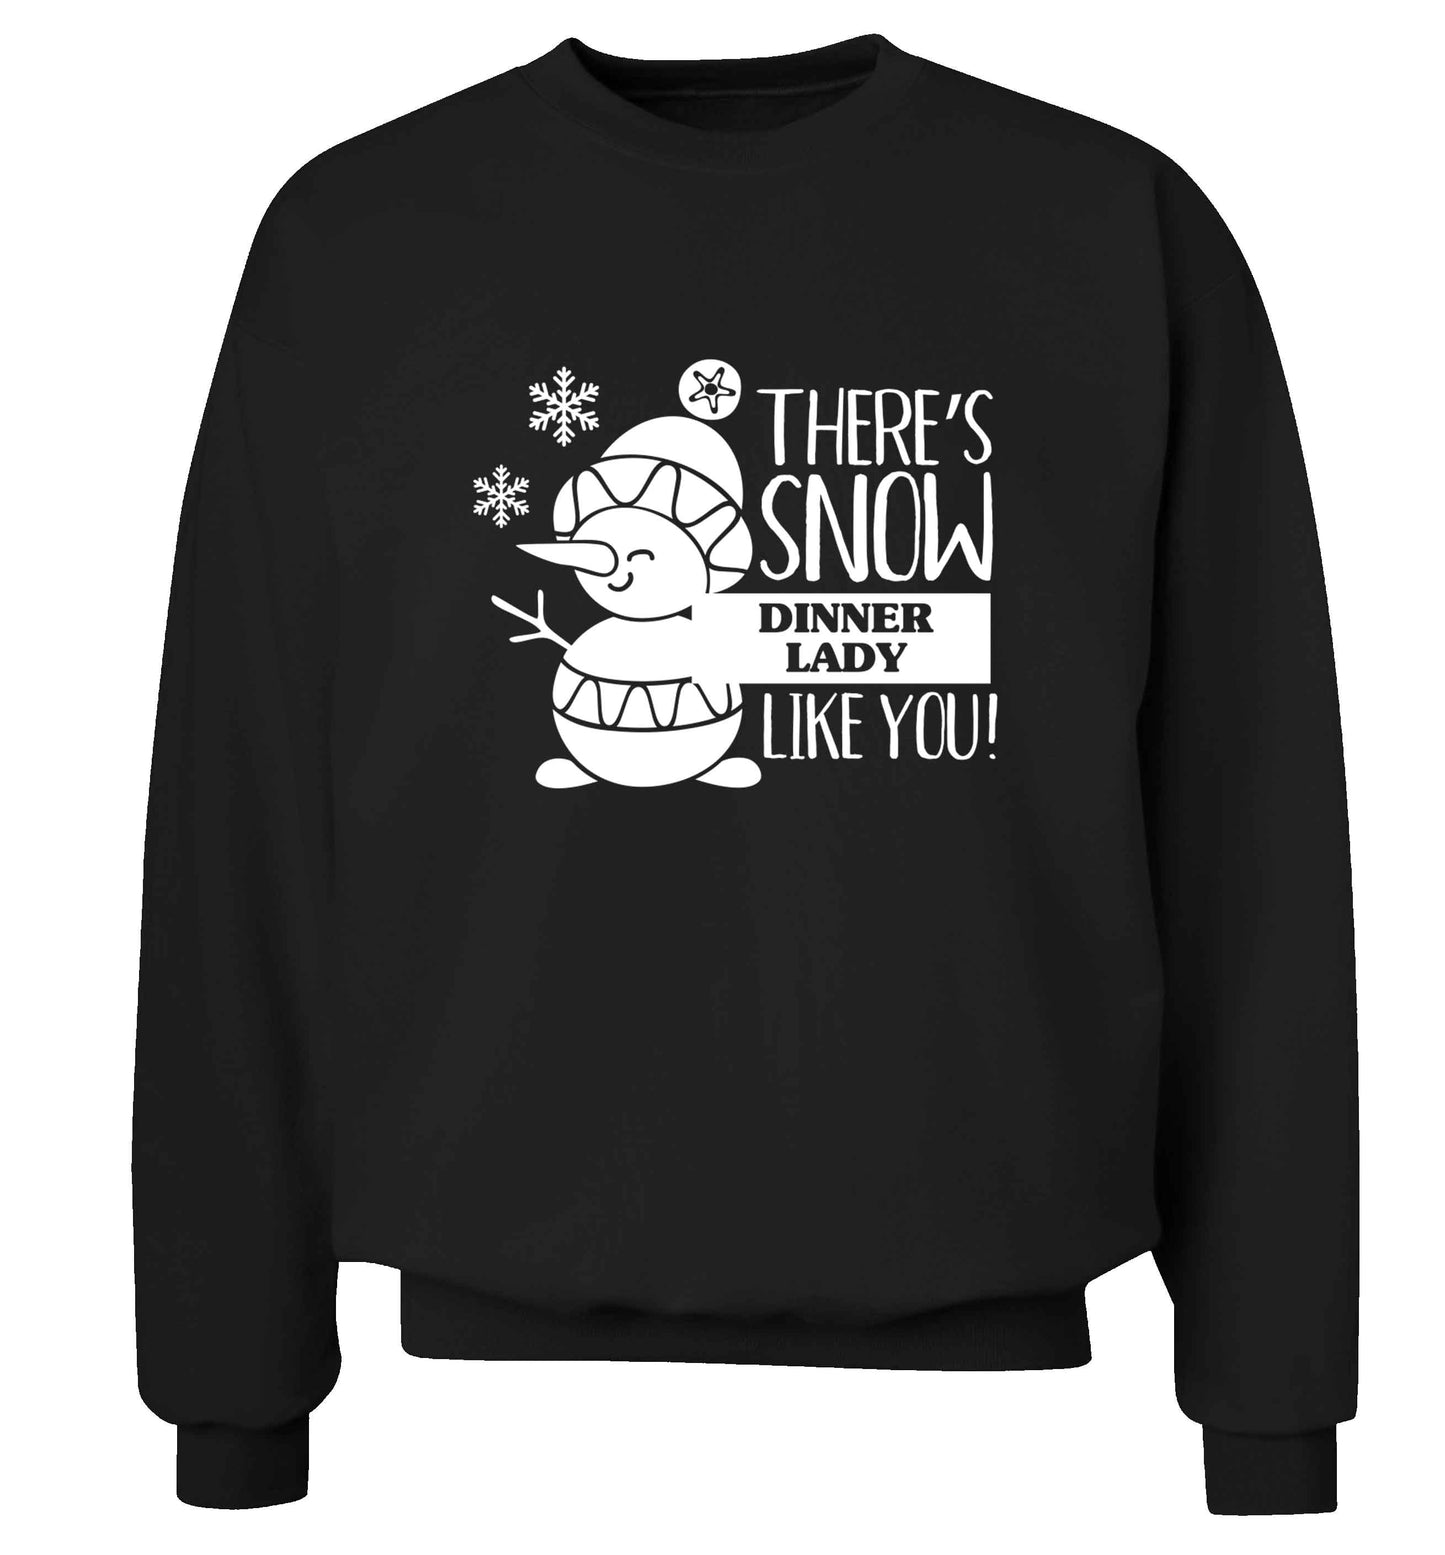 There's snow dinner lady like you adult's unisex black sweater 2XL